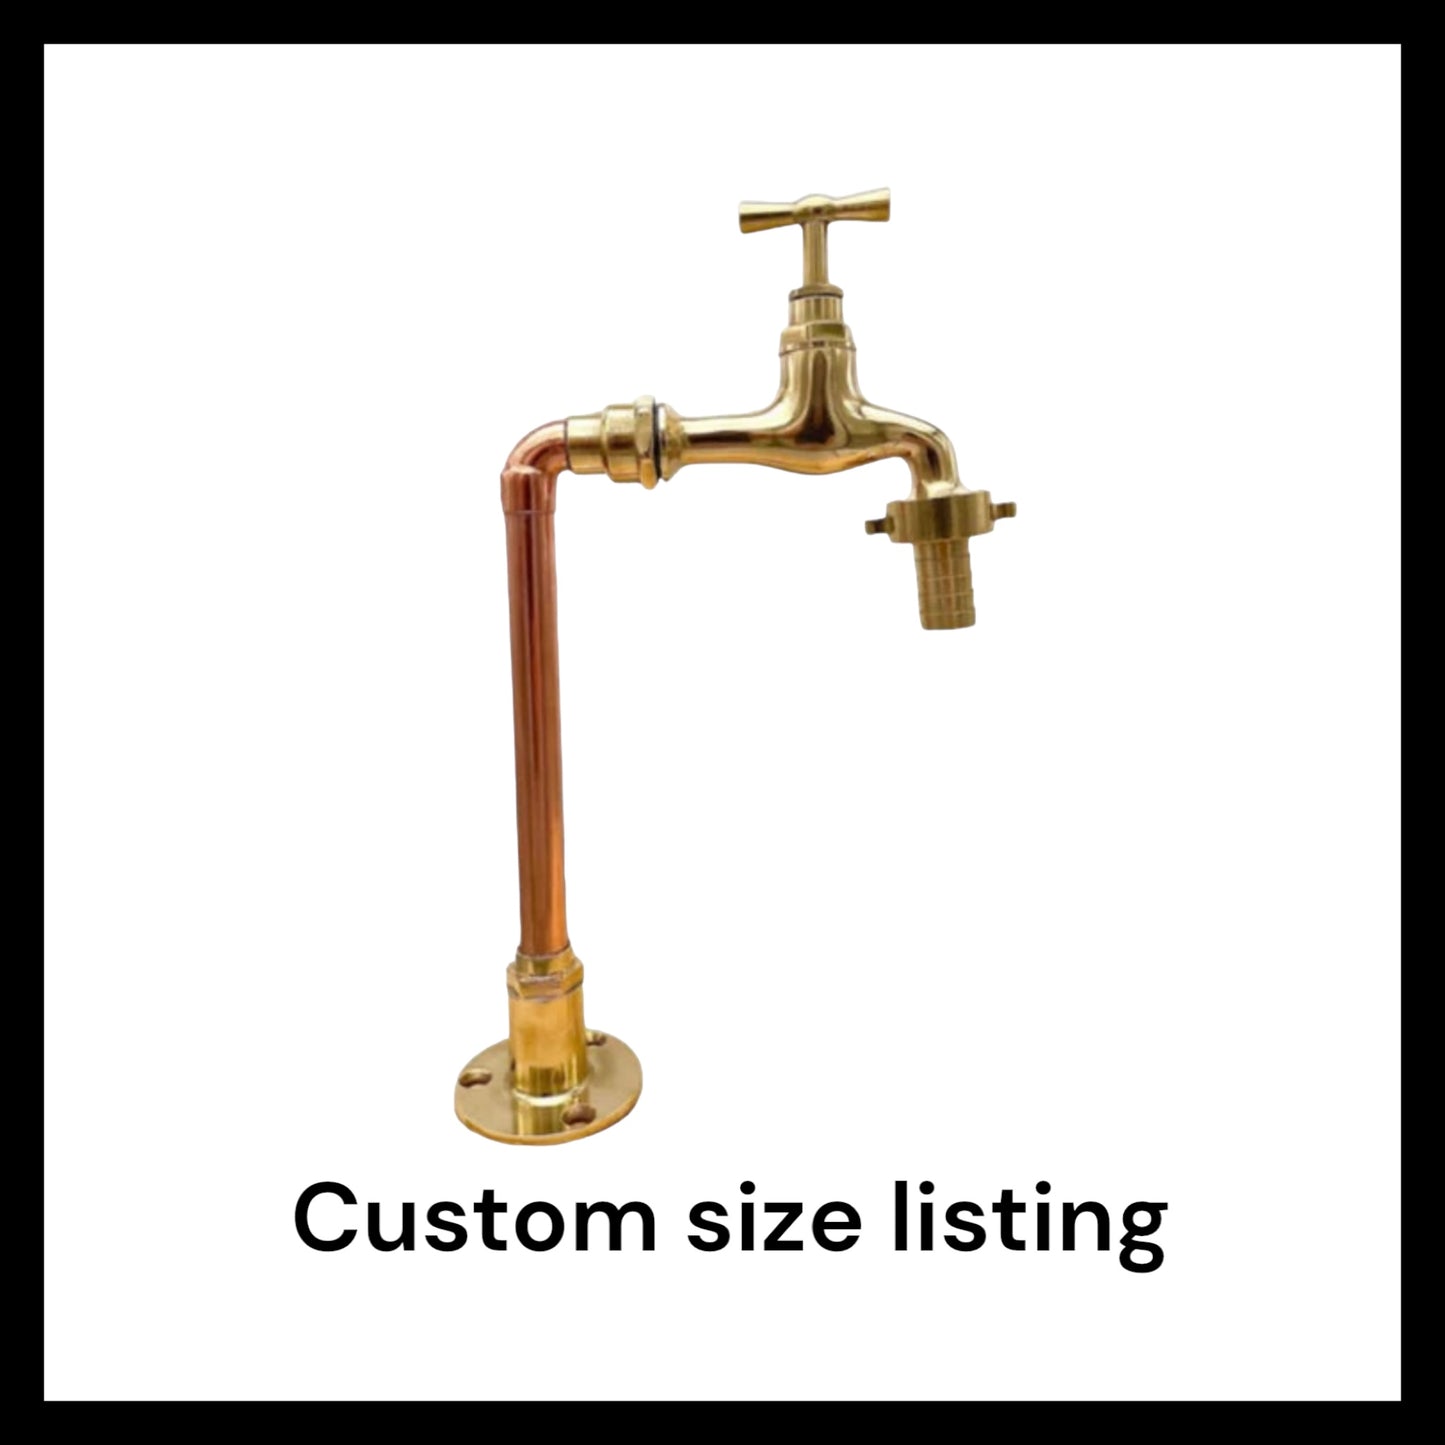 Bespoke Made to Order Vintage Style Copper and Brass Handmade Pillar Tap, ideal for a Belfast sink (T12)